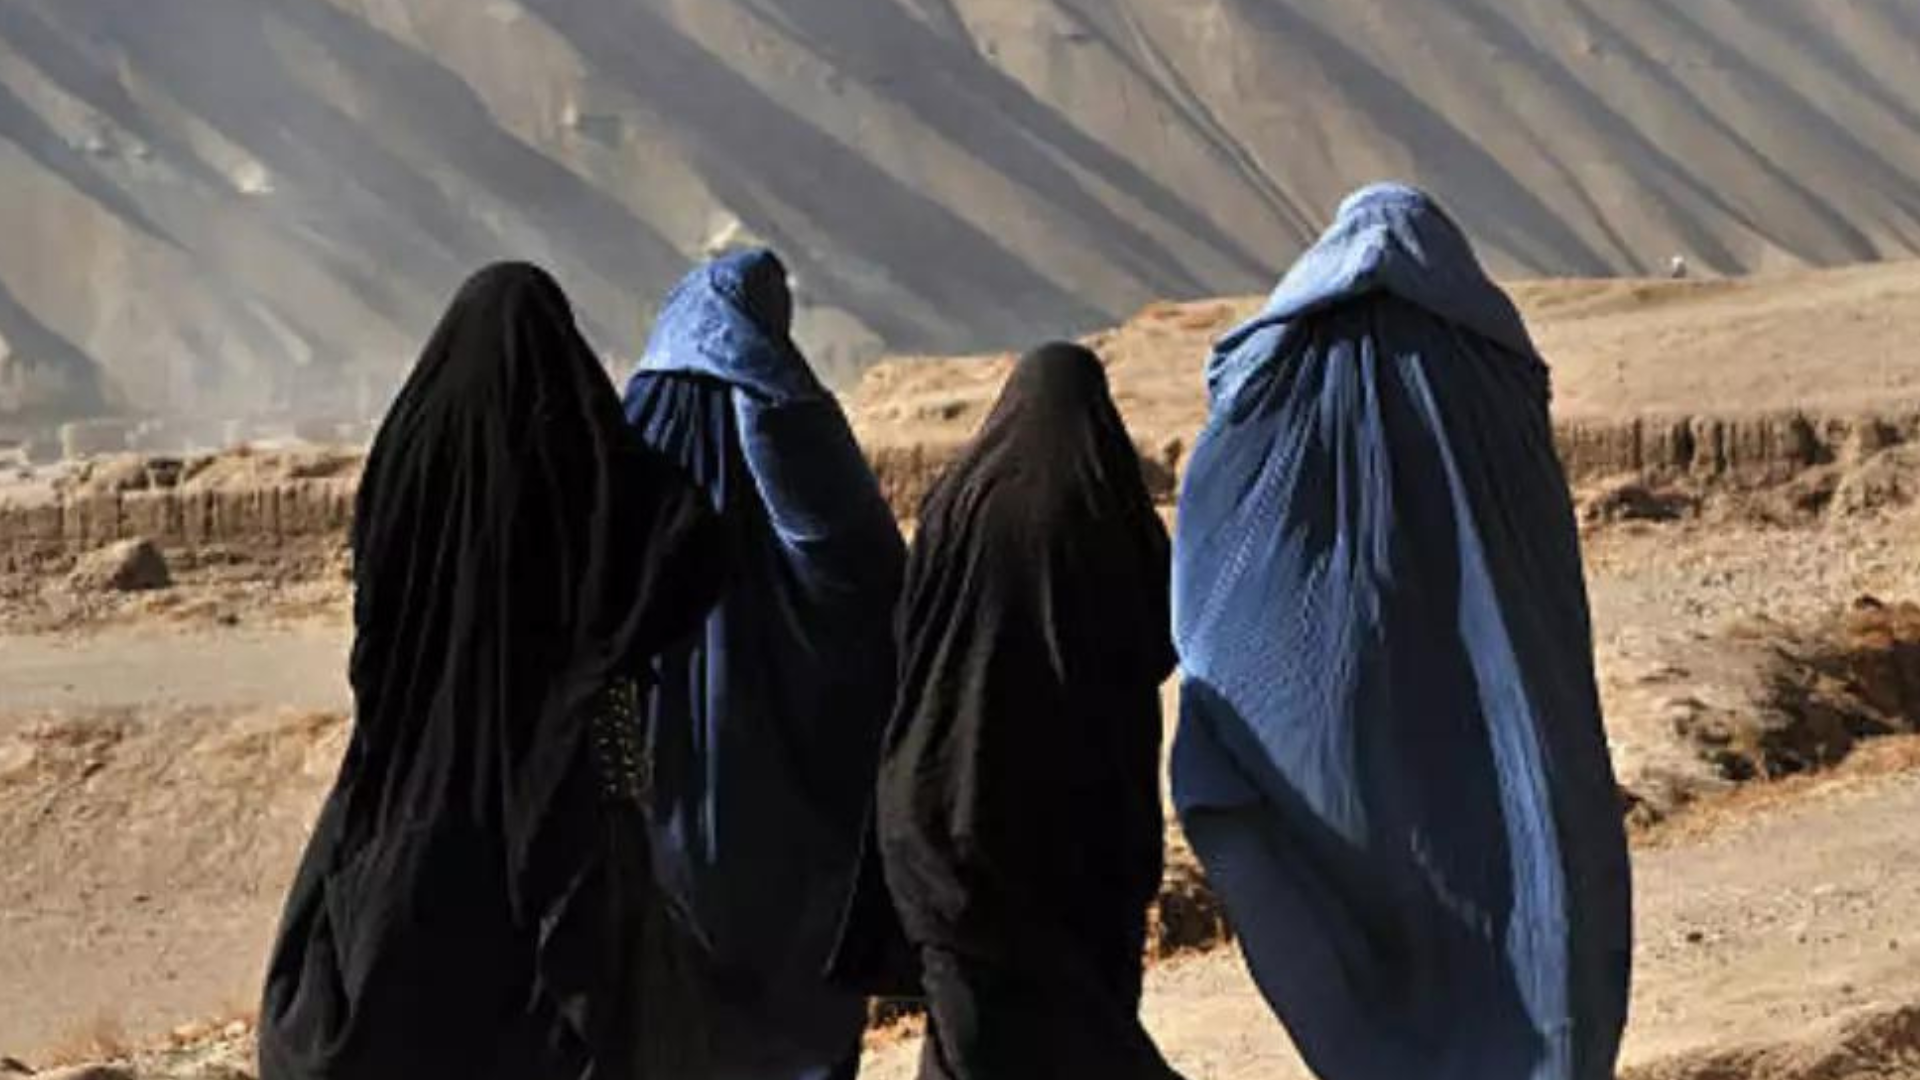 Unmarried Women Are Not Allowed to Work Under Taliban’s New Restrictions - Post Image